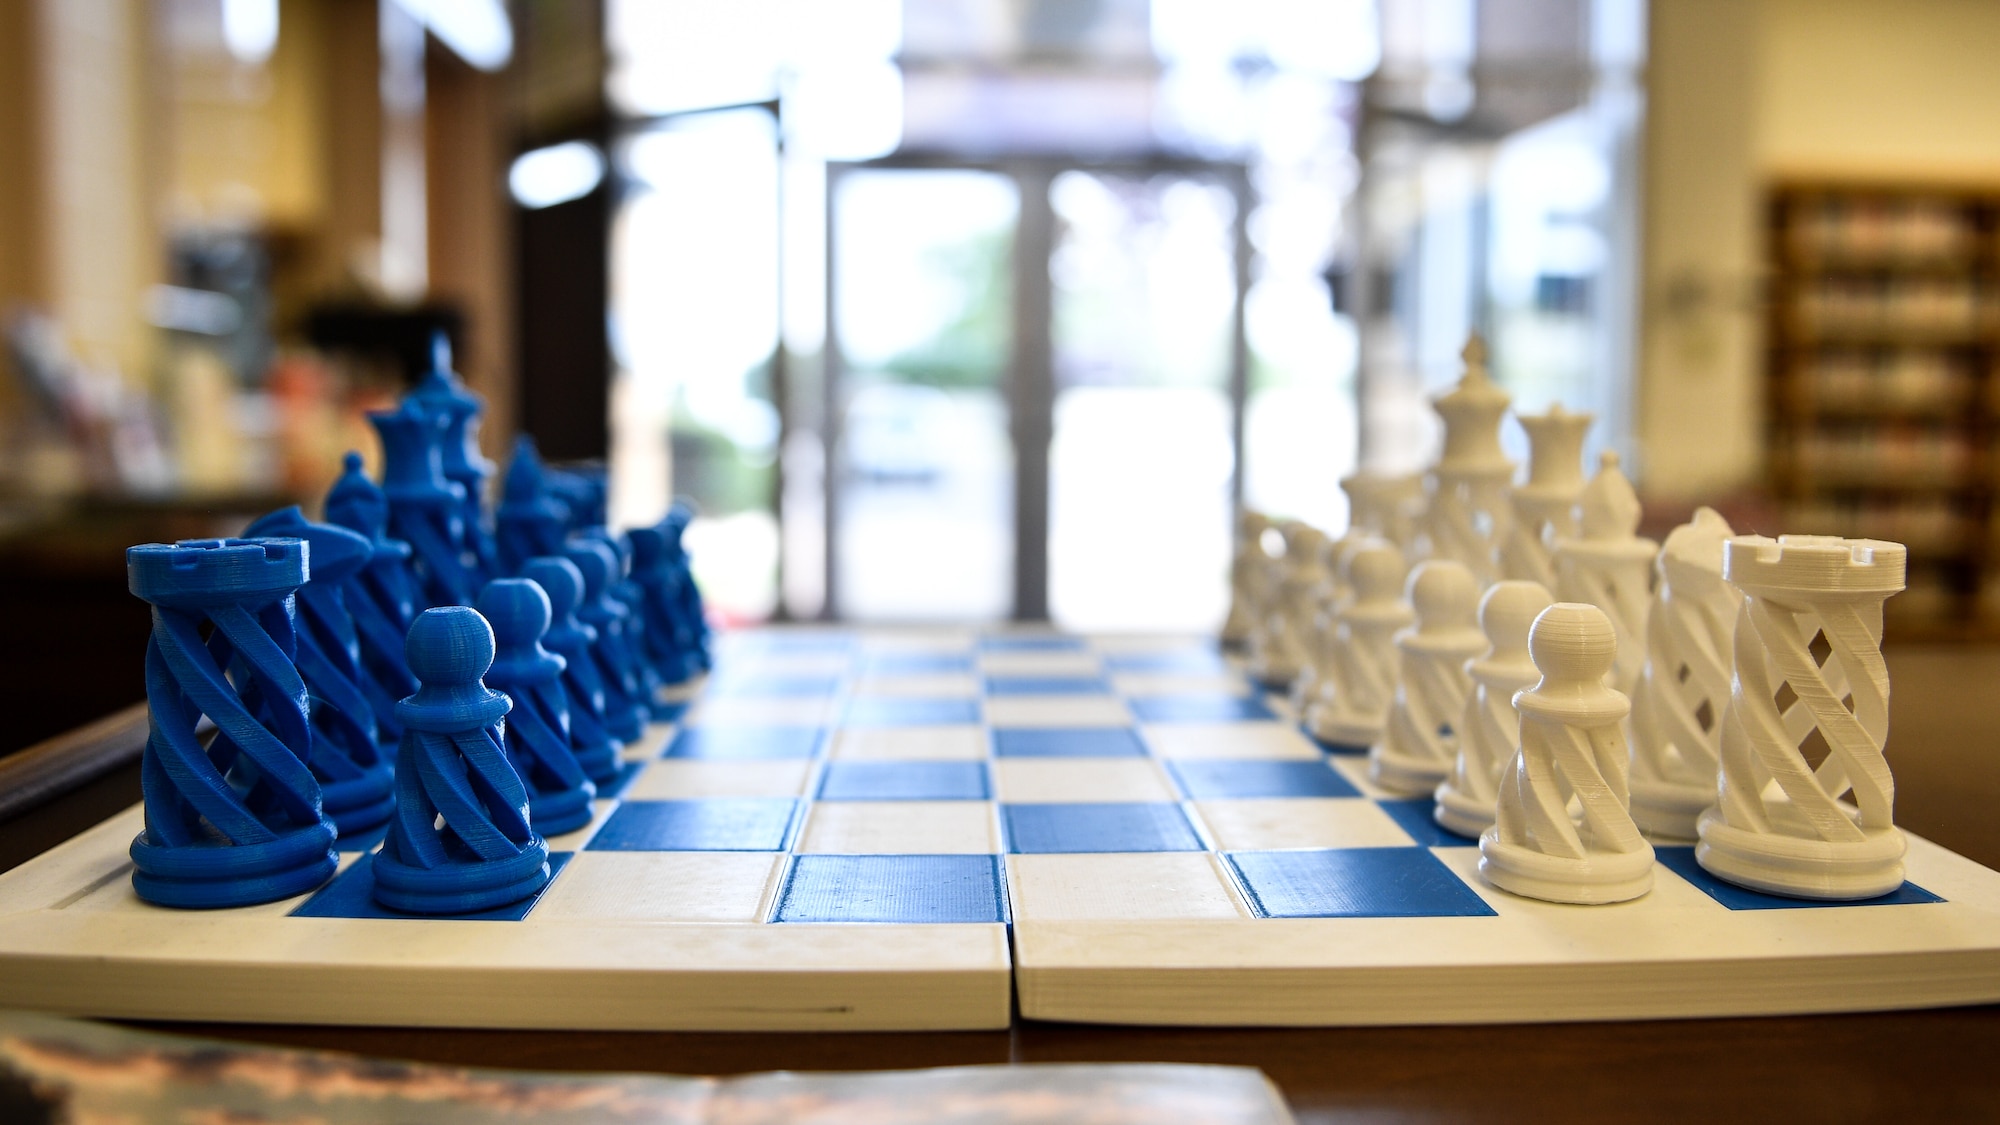 A chess set printed by the Gerrity Memorial Library's 3-D printer sits on a table at Hill Air Force Base, Utah, July 26, 2018. Visitors can bring in 3-D printer programs and have their projects printed by library staff. (U.S. Air Force photo by R. Nial Bradshaw)